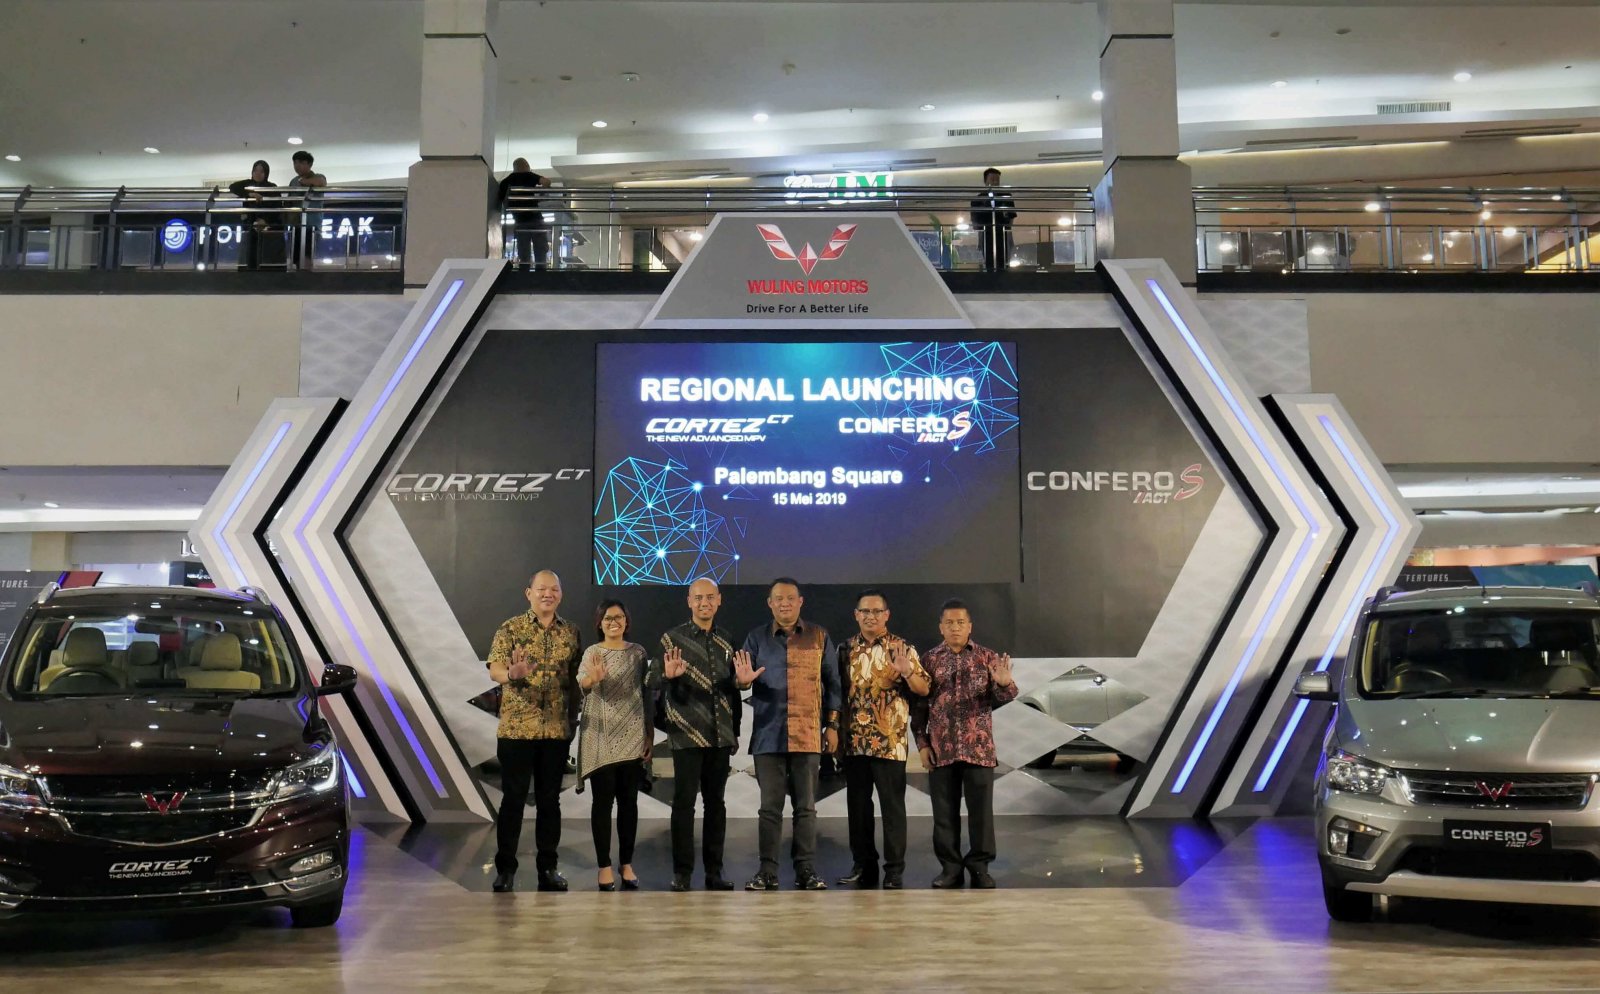 Image Wuling Officialy Brings Cortez CT and ACT Confero S to Palembang